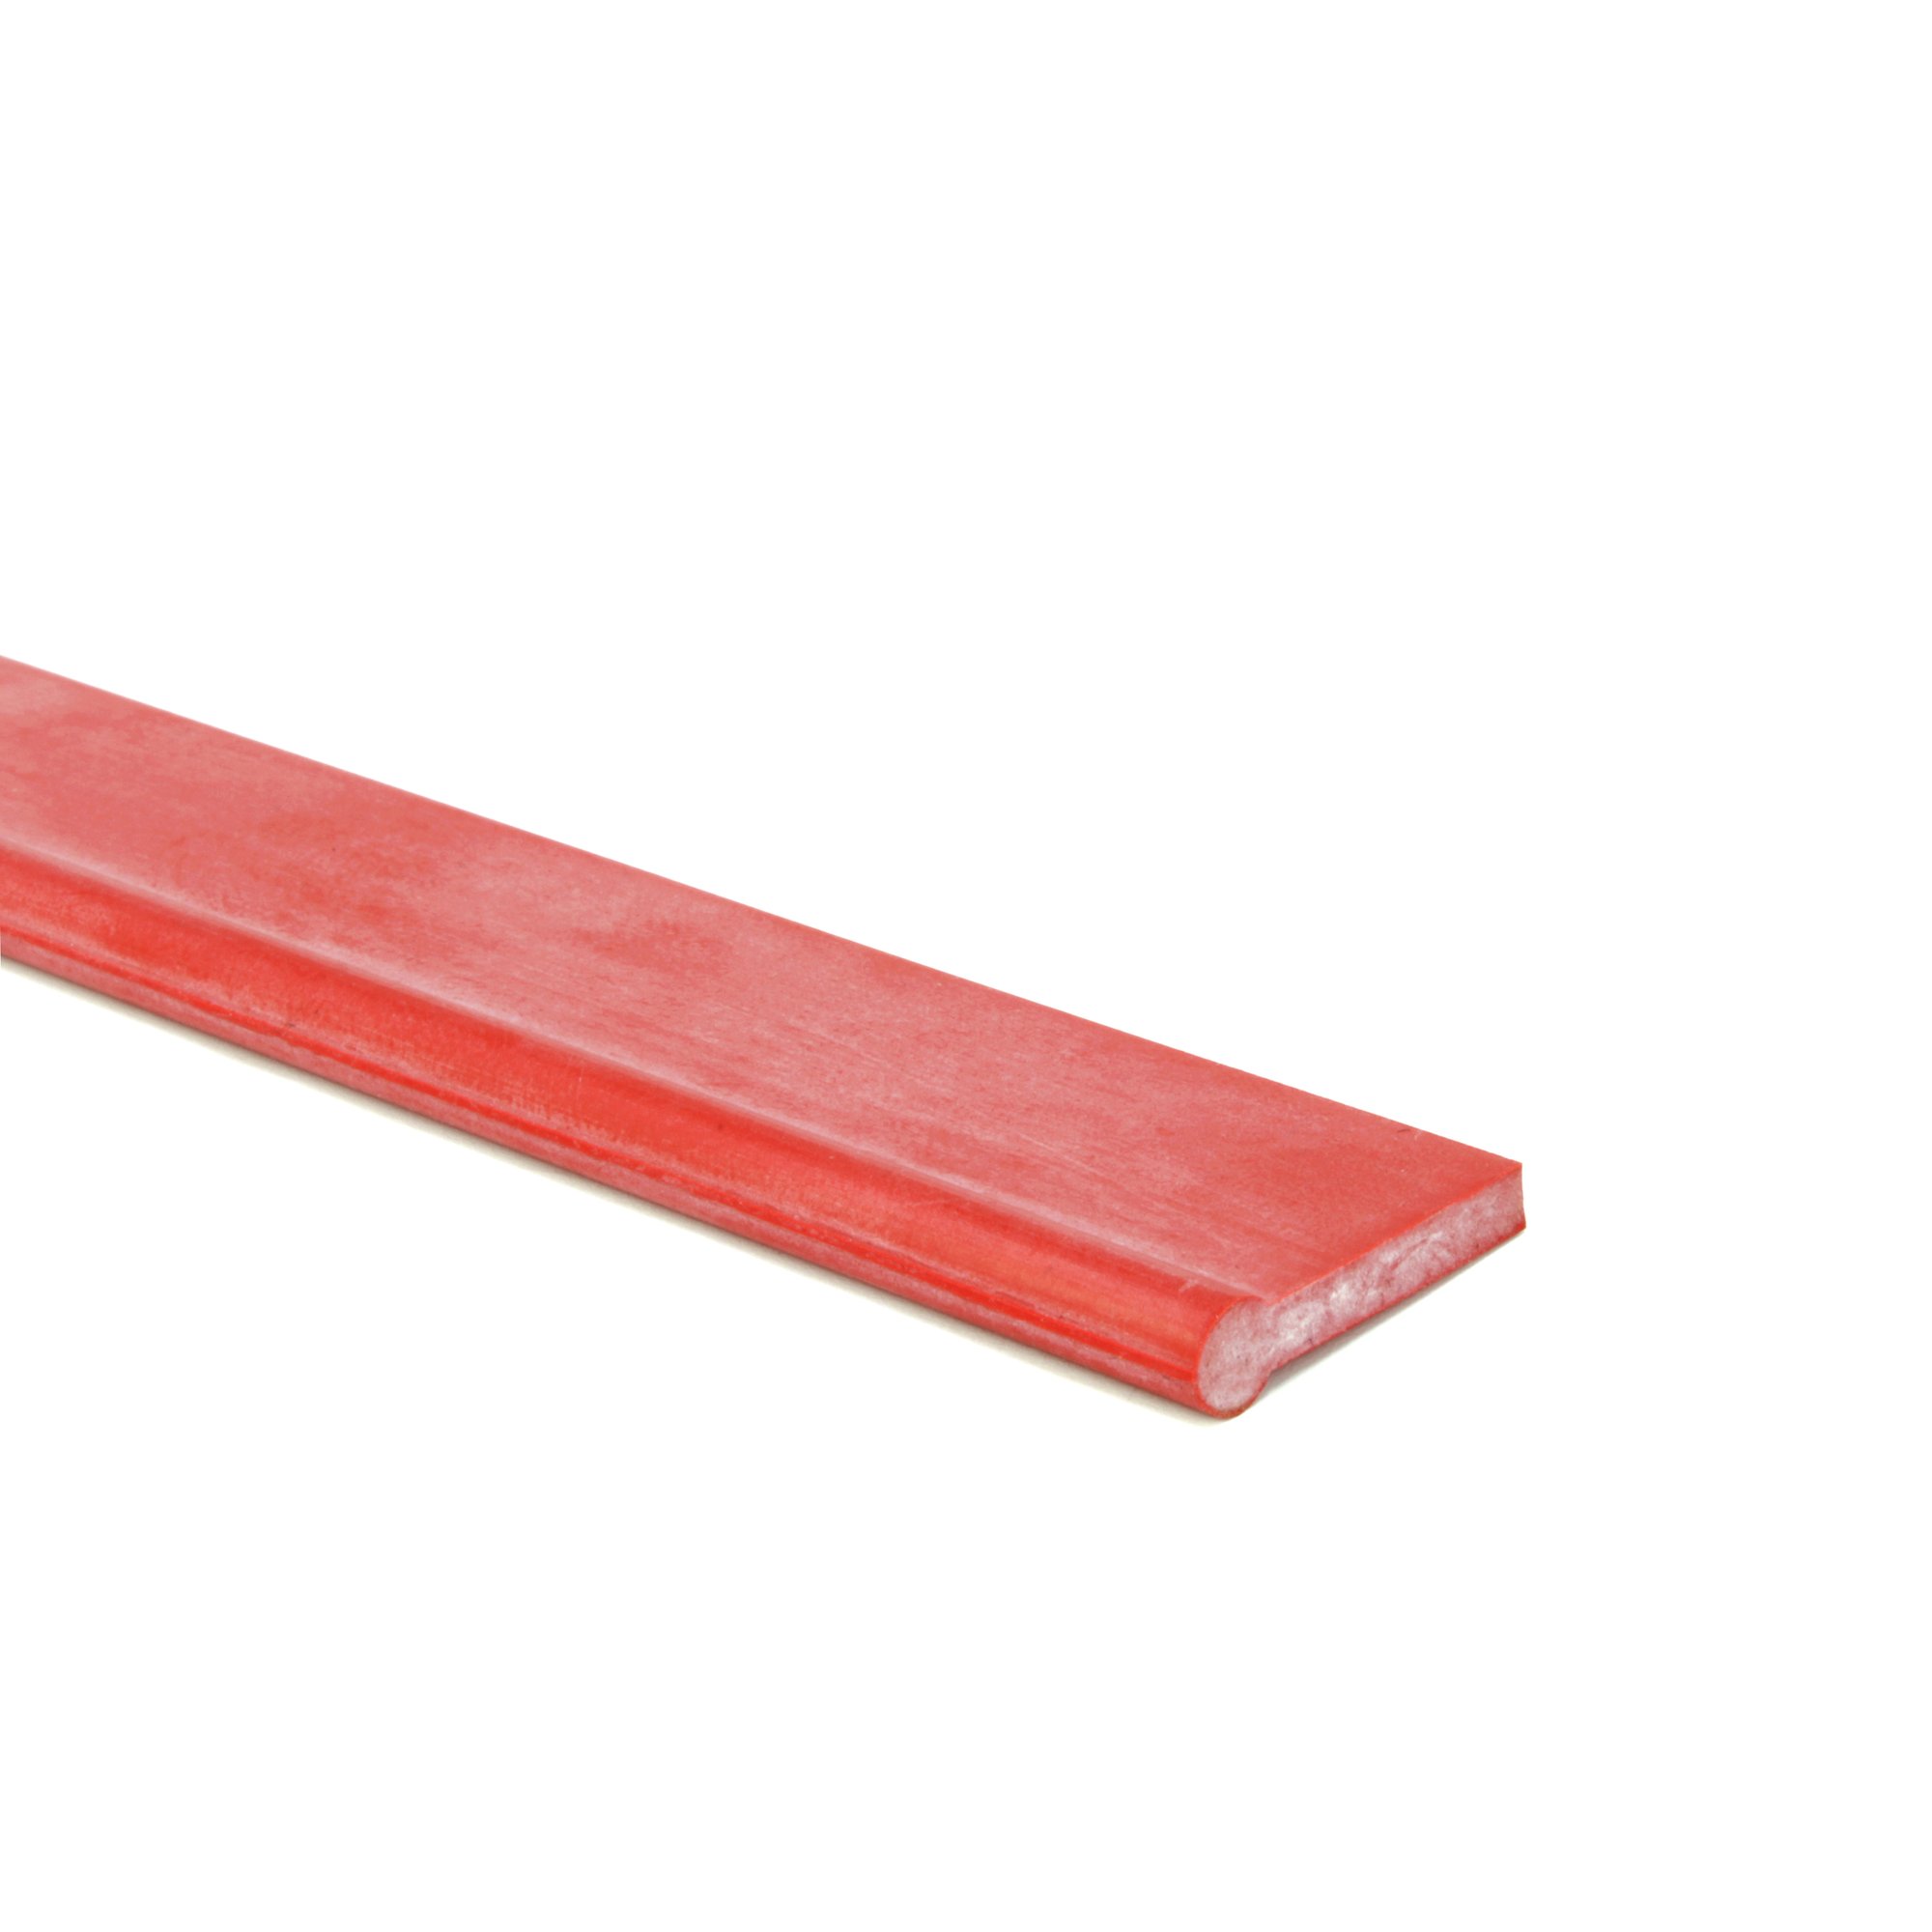 Window Cleaning Rubber - Red FaceLift FireBlade Squeegee Rubber